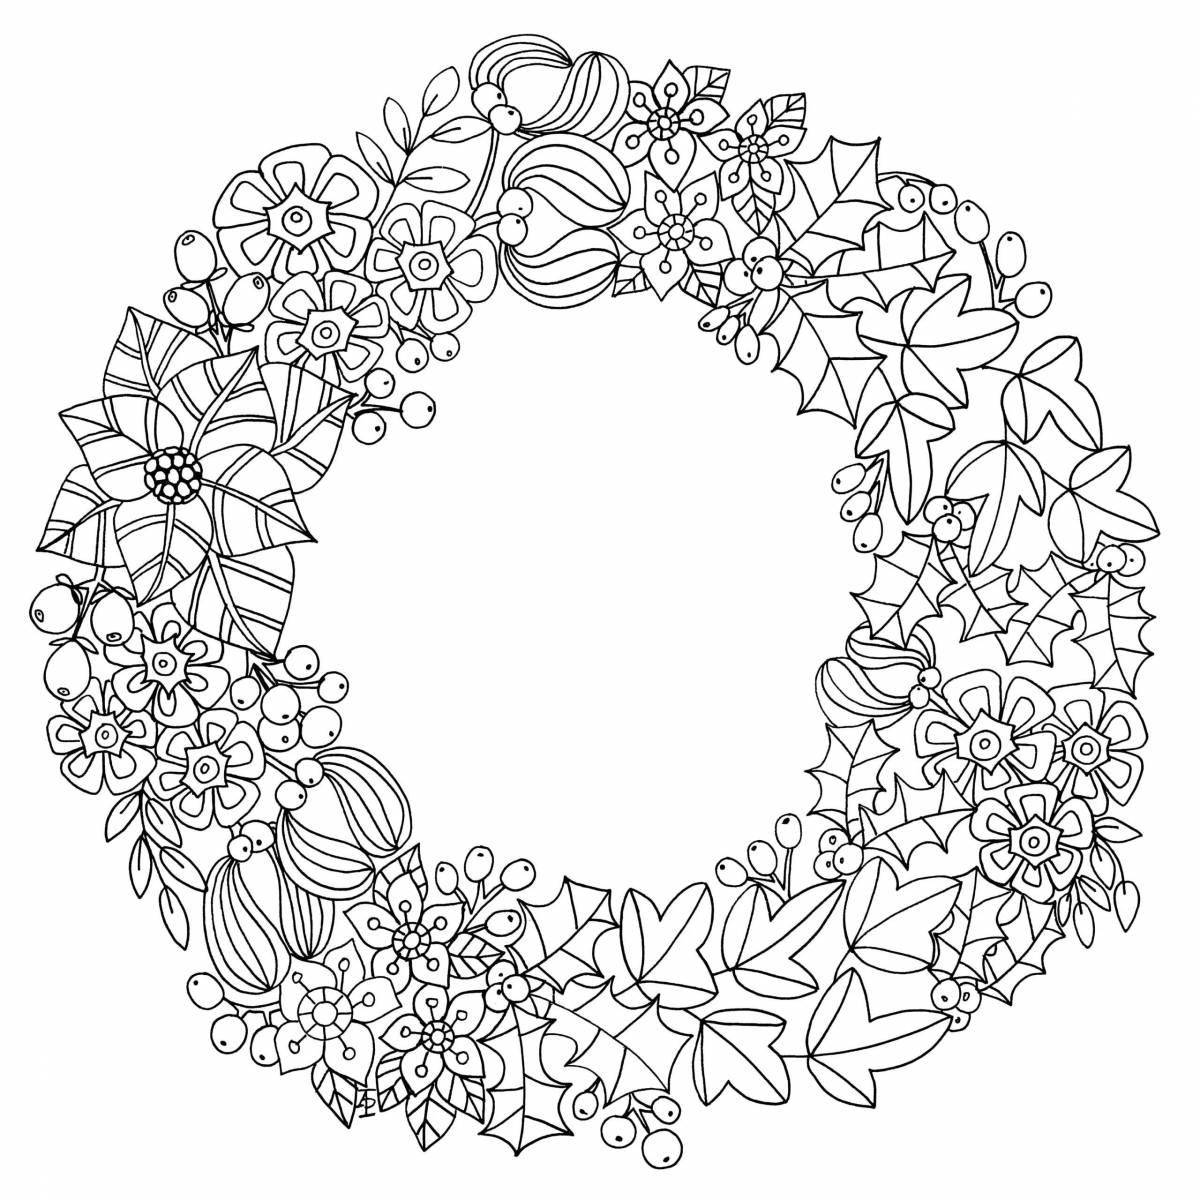 Coloring majestic wreath